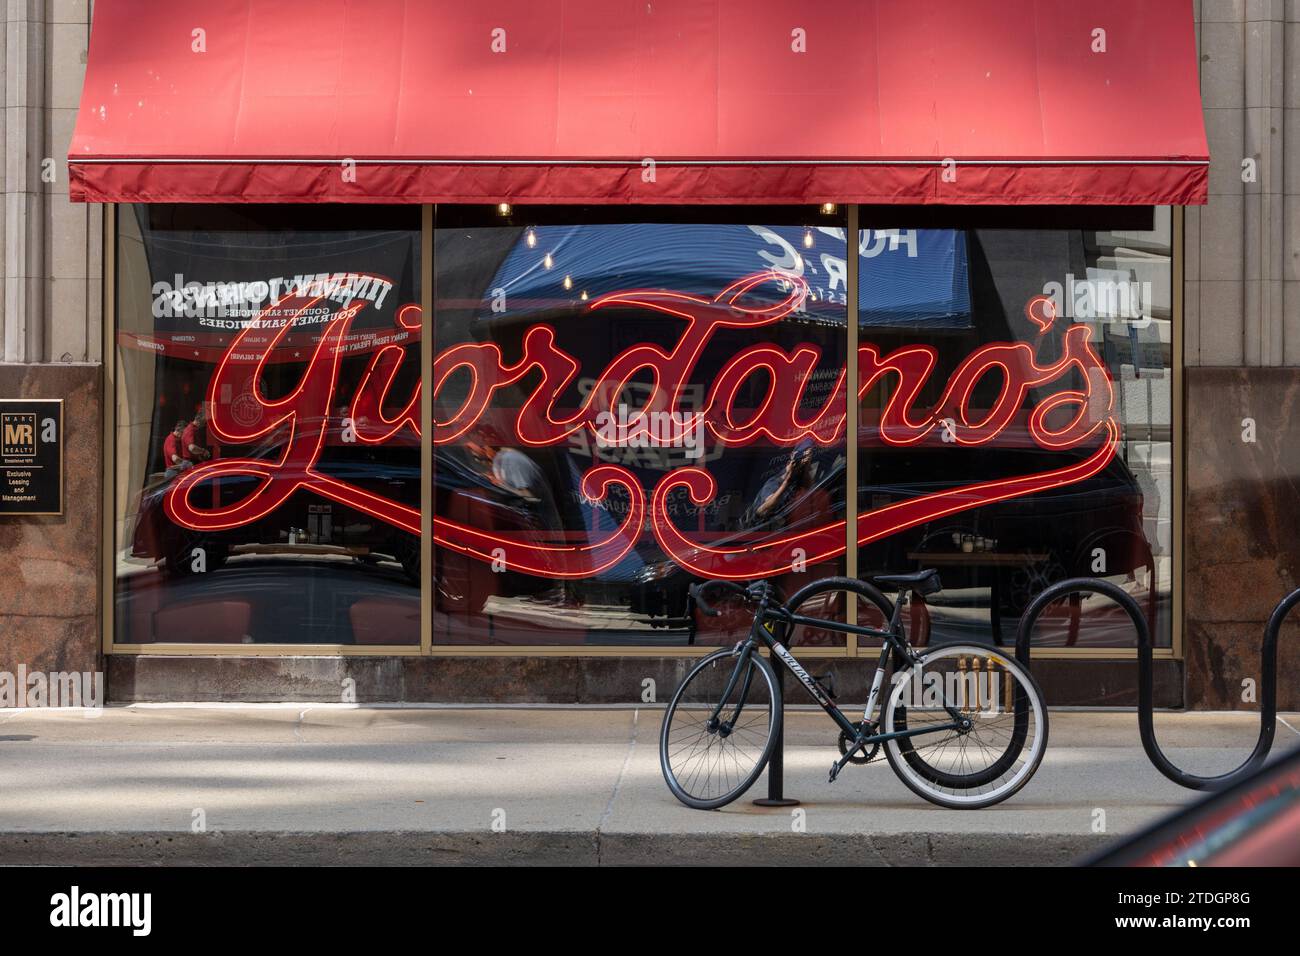 Giordano's is an American Pizzeria Chain Specializing In Chicago Style Stuffed Crust Pizza, W Jackson Blvd, Chicago, United States June 16, 2023 Stock Photo